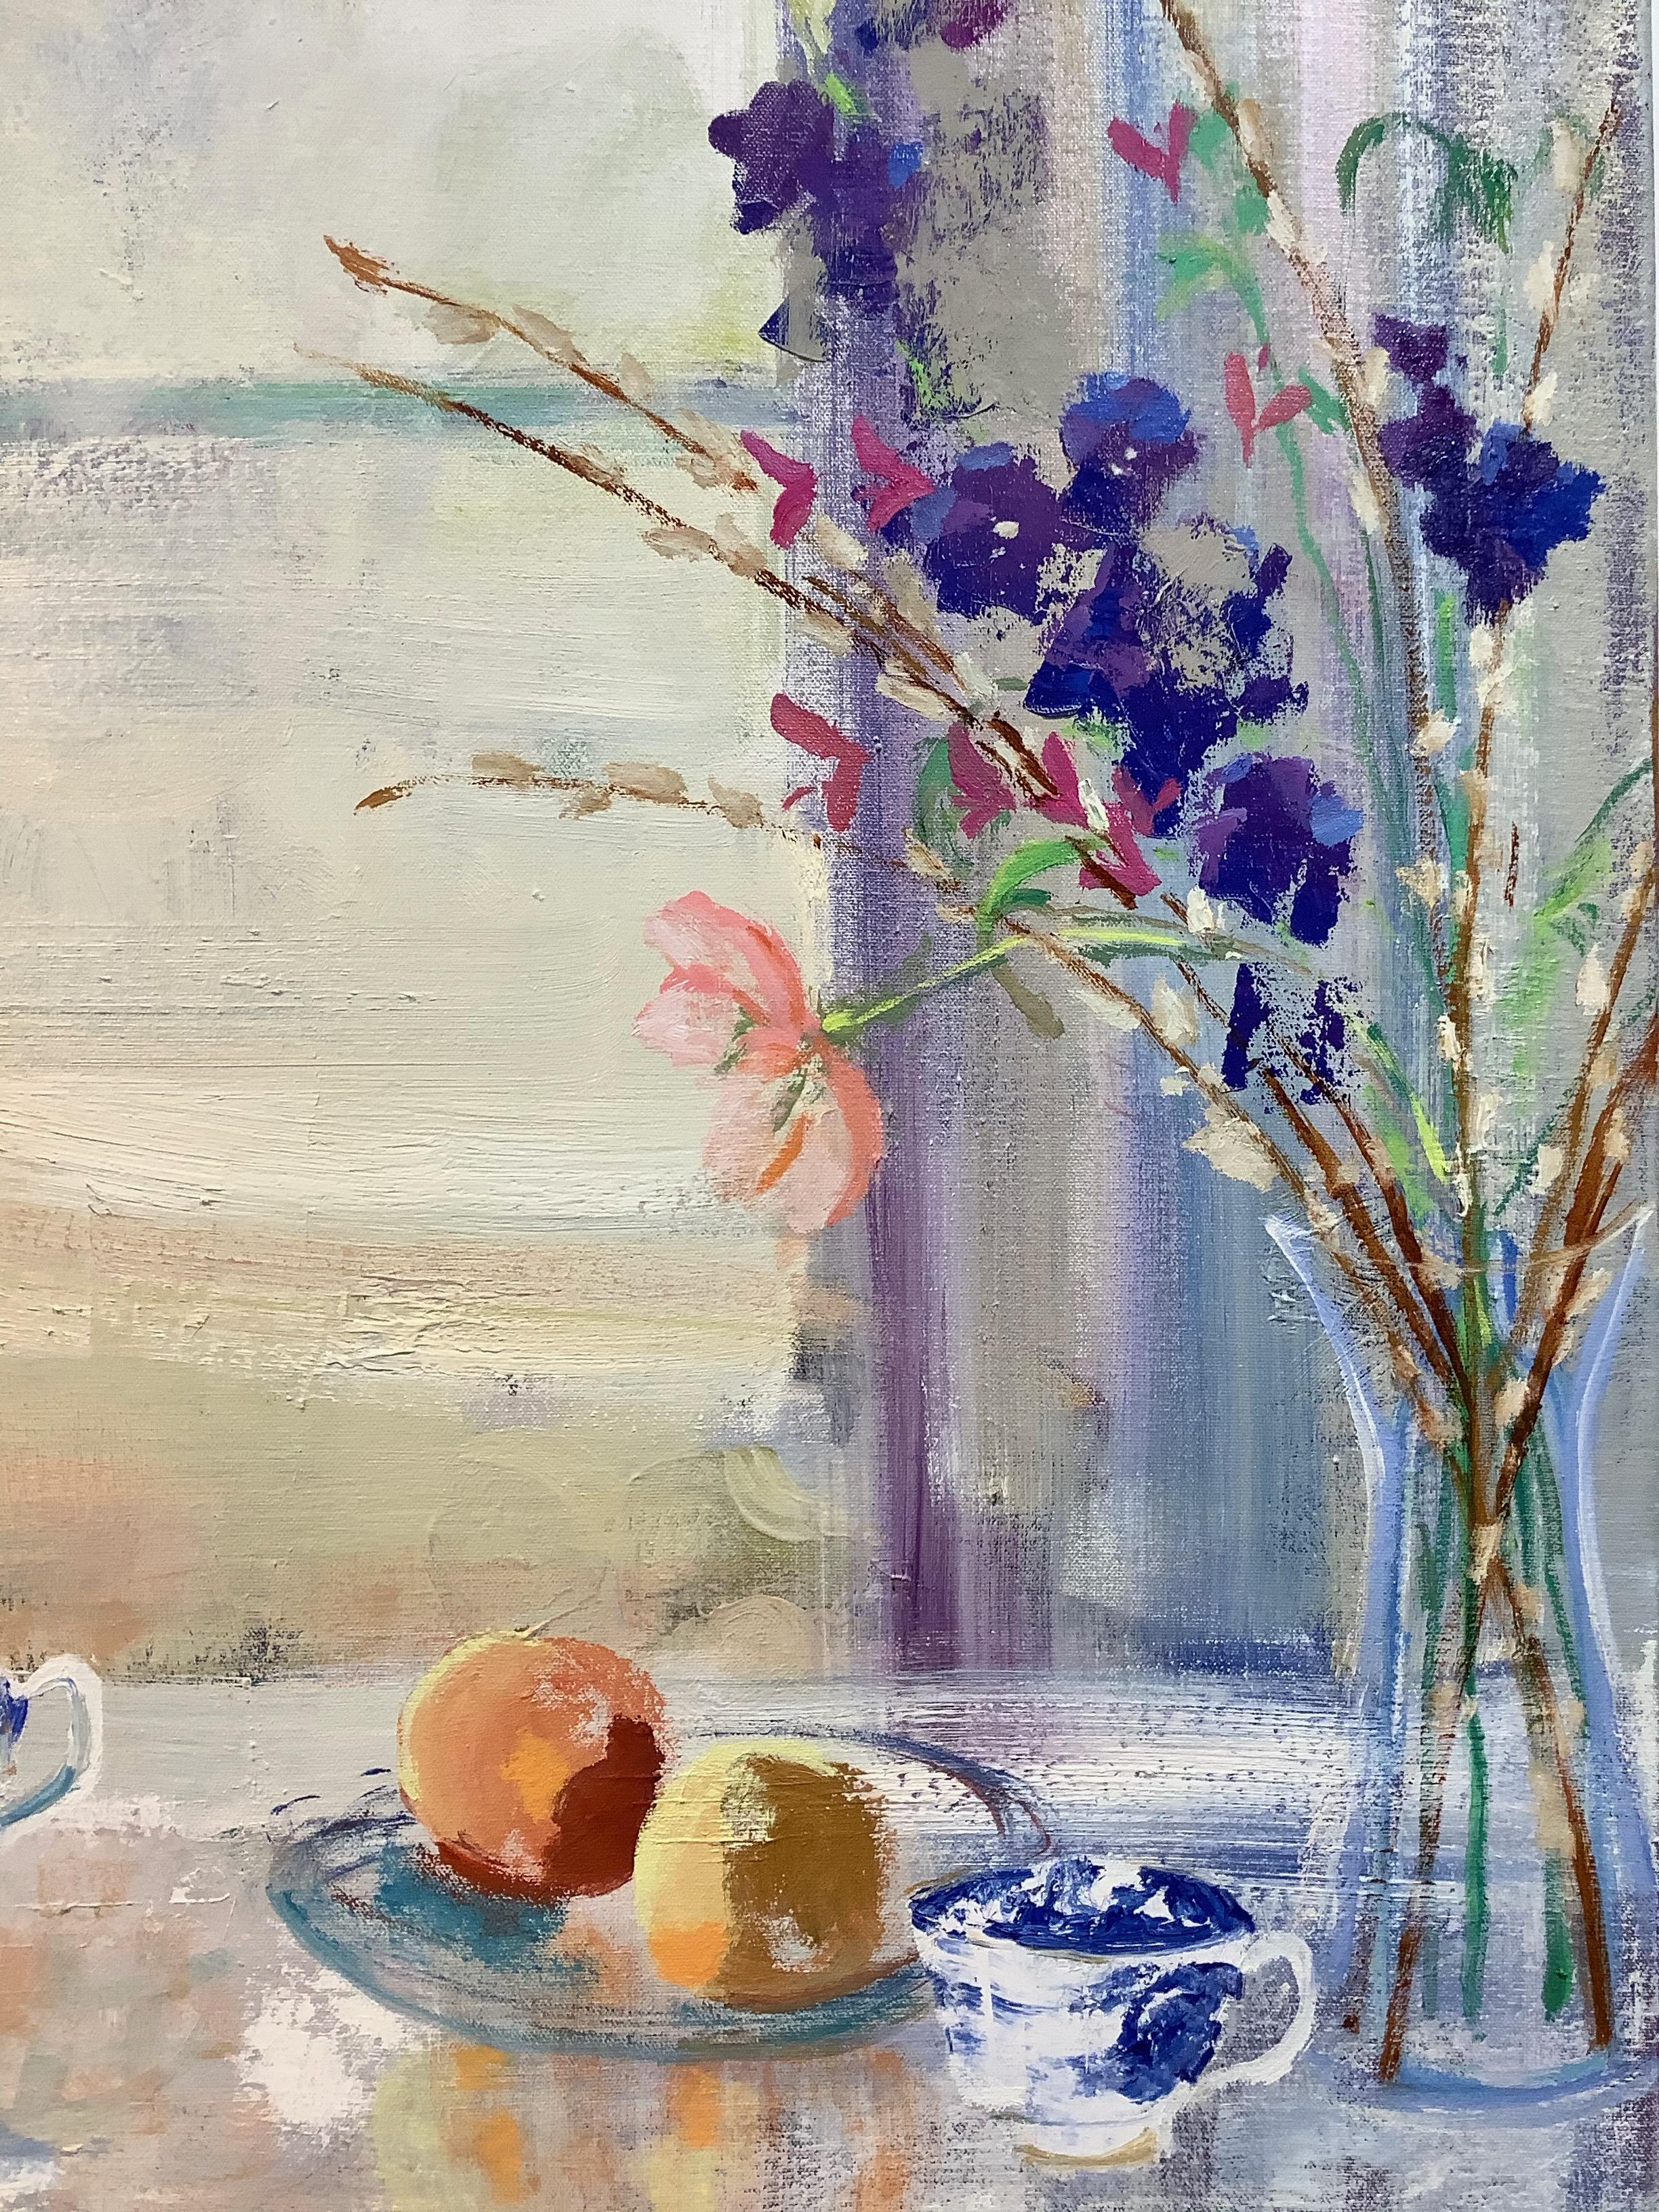 Willow Willow, Interior Painting Botanical Still Life, Lake Landscape, Fruits 3